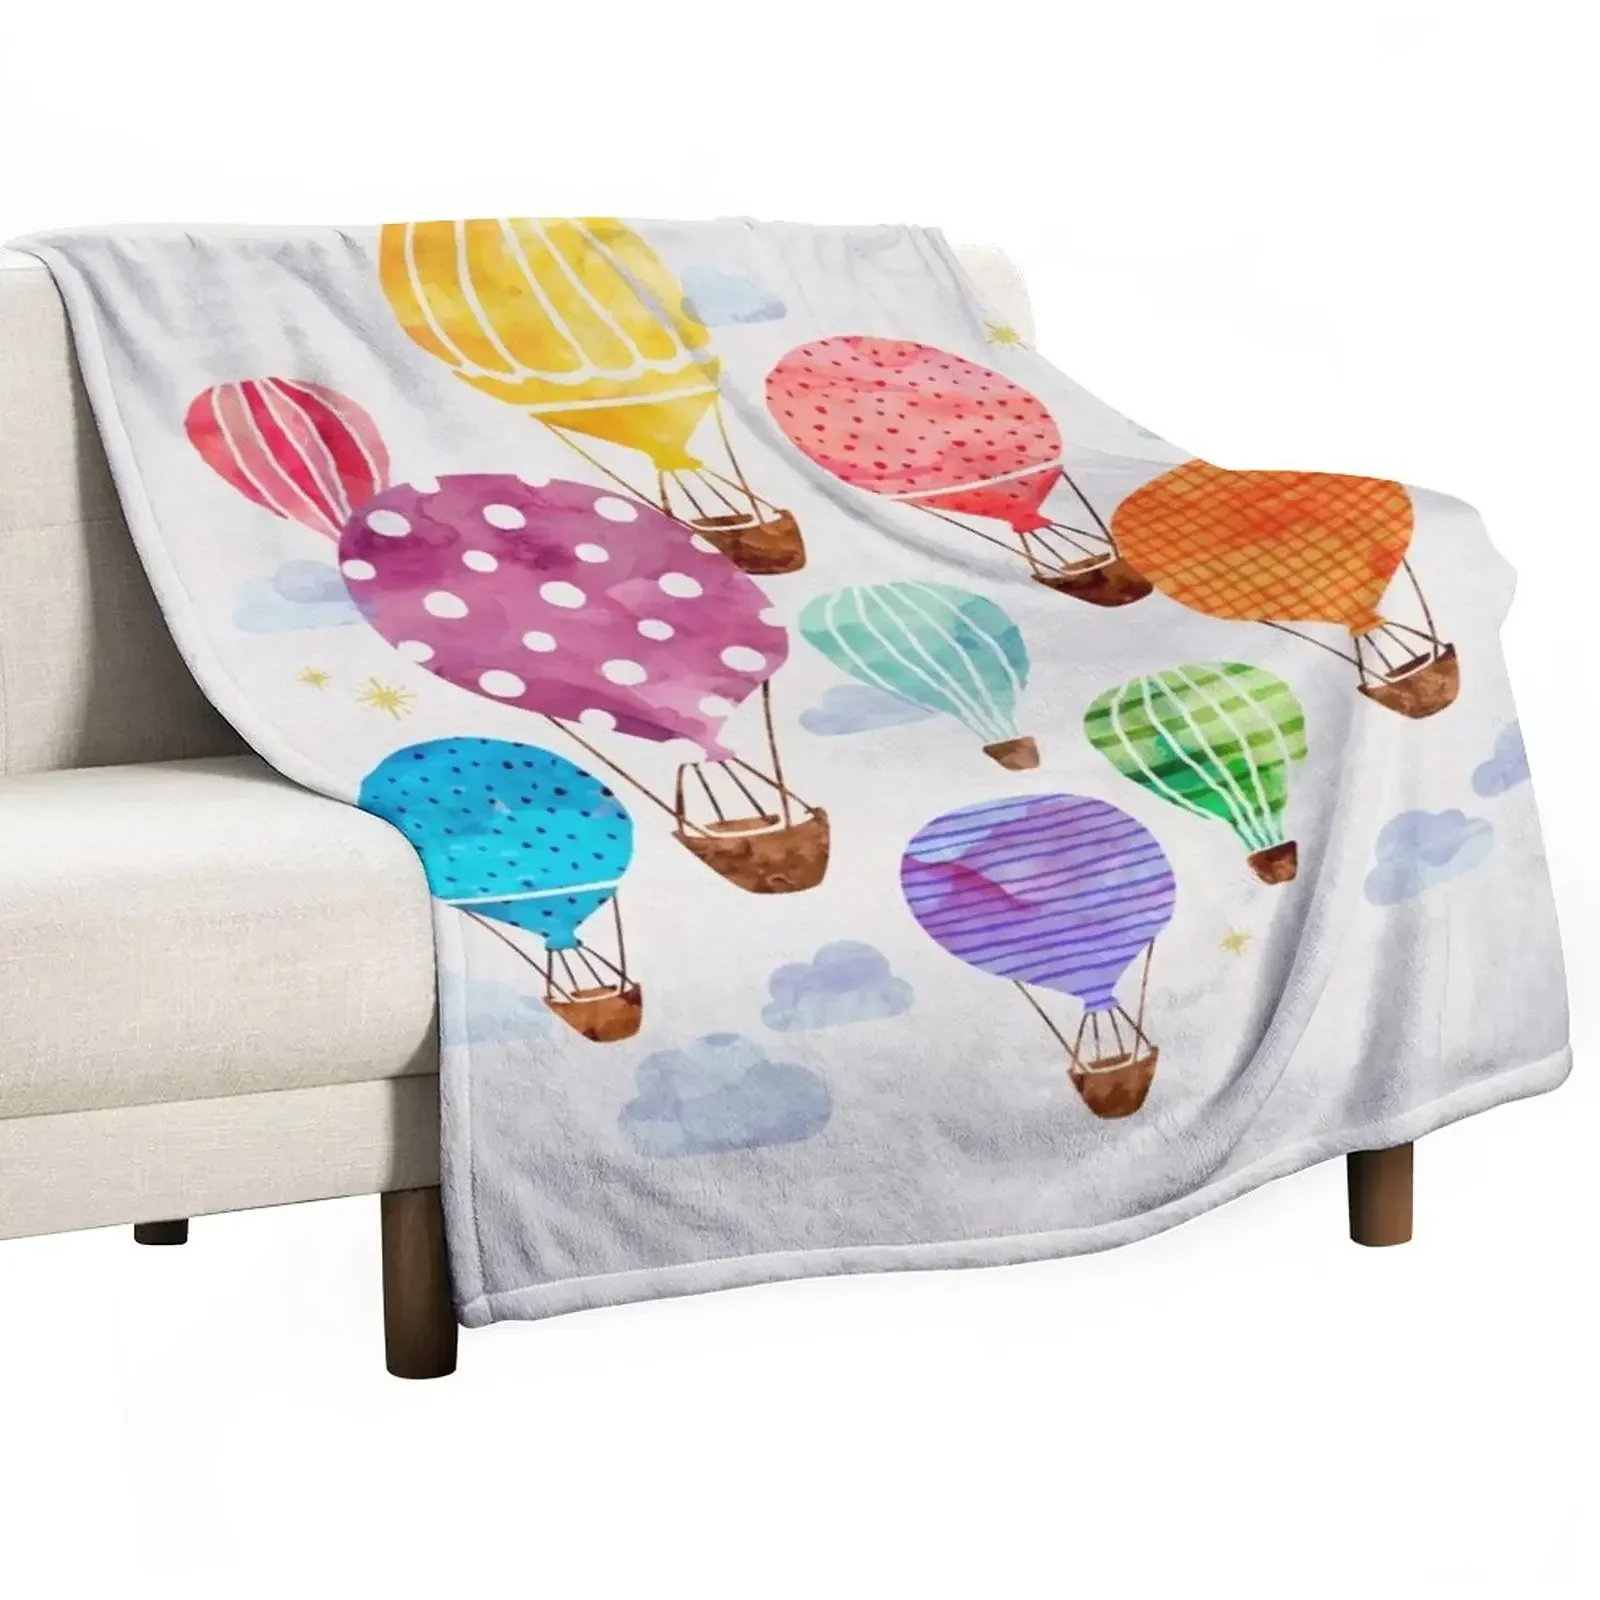 

Hot Air Balloon Throw Blanket Winter beds Fluffys Large wednesday Blankets